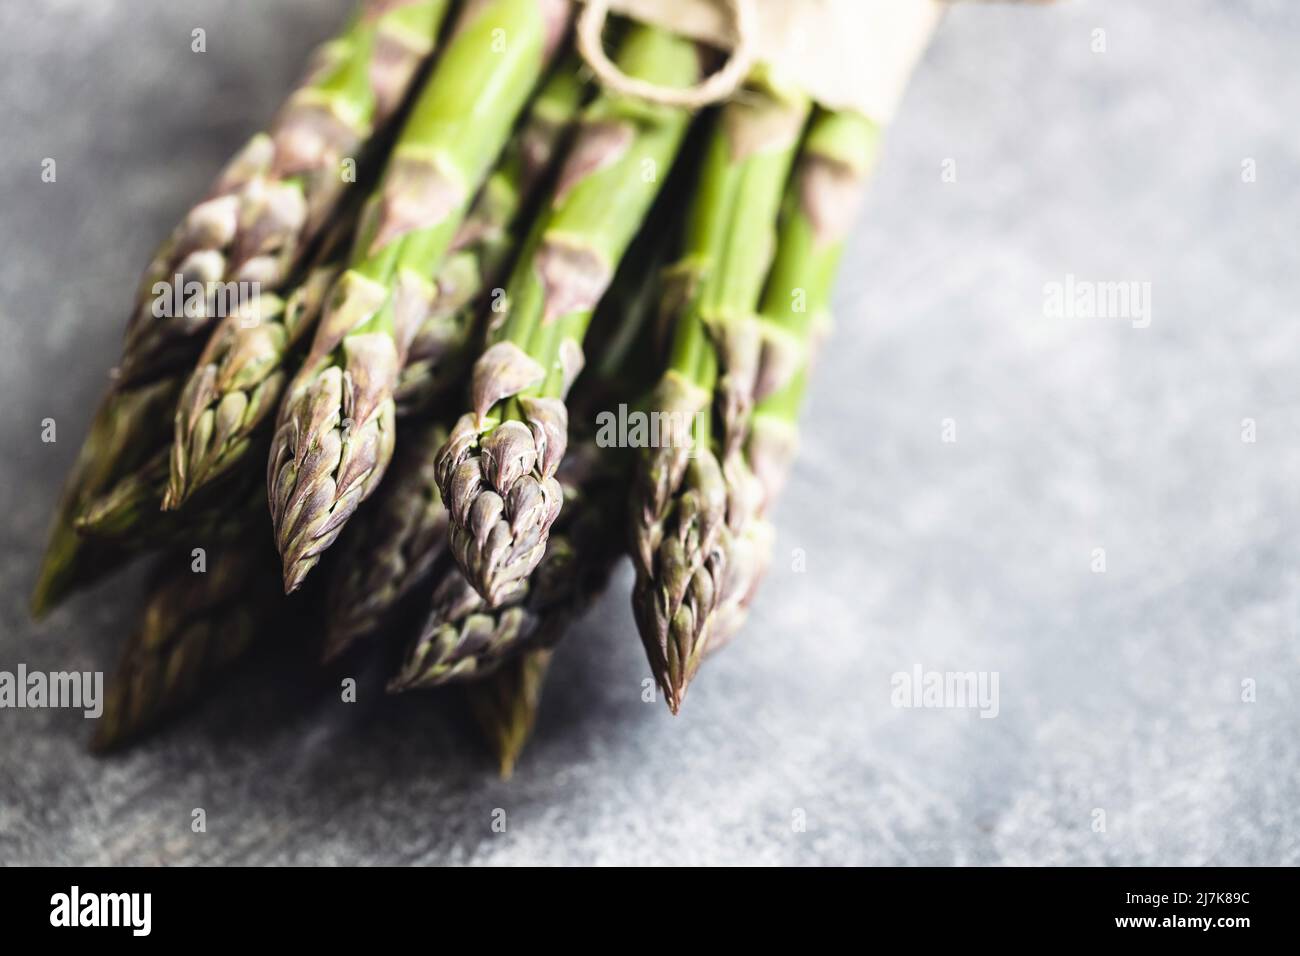 Bunch of fresh asparagus tied rope on gray table. Stock Photo